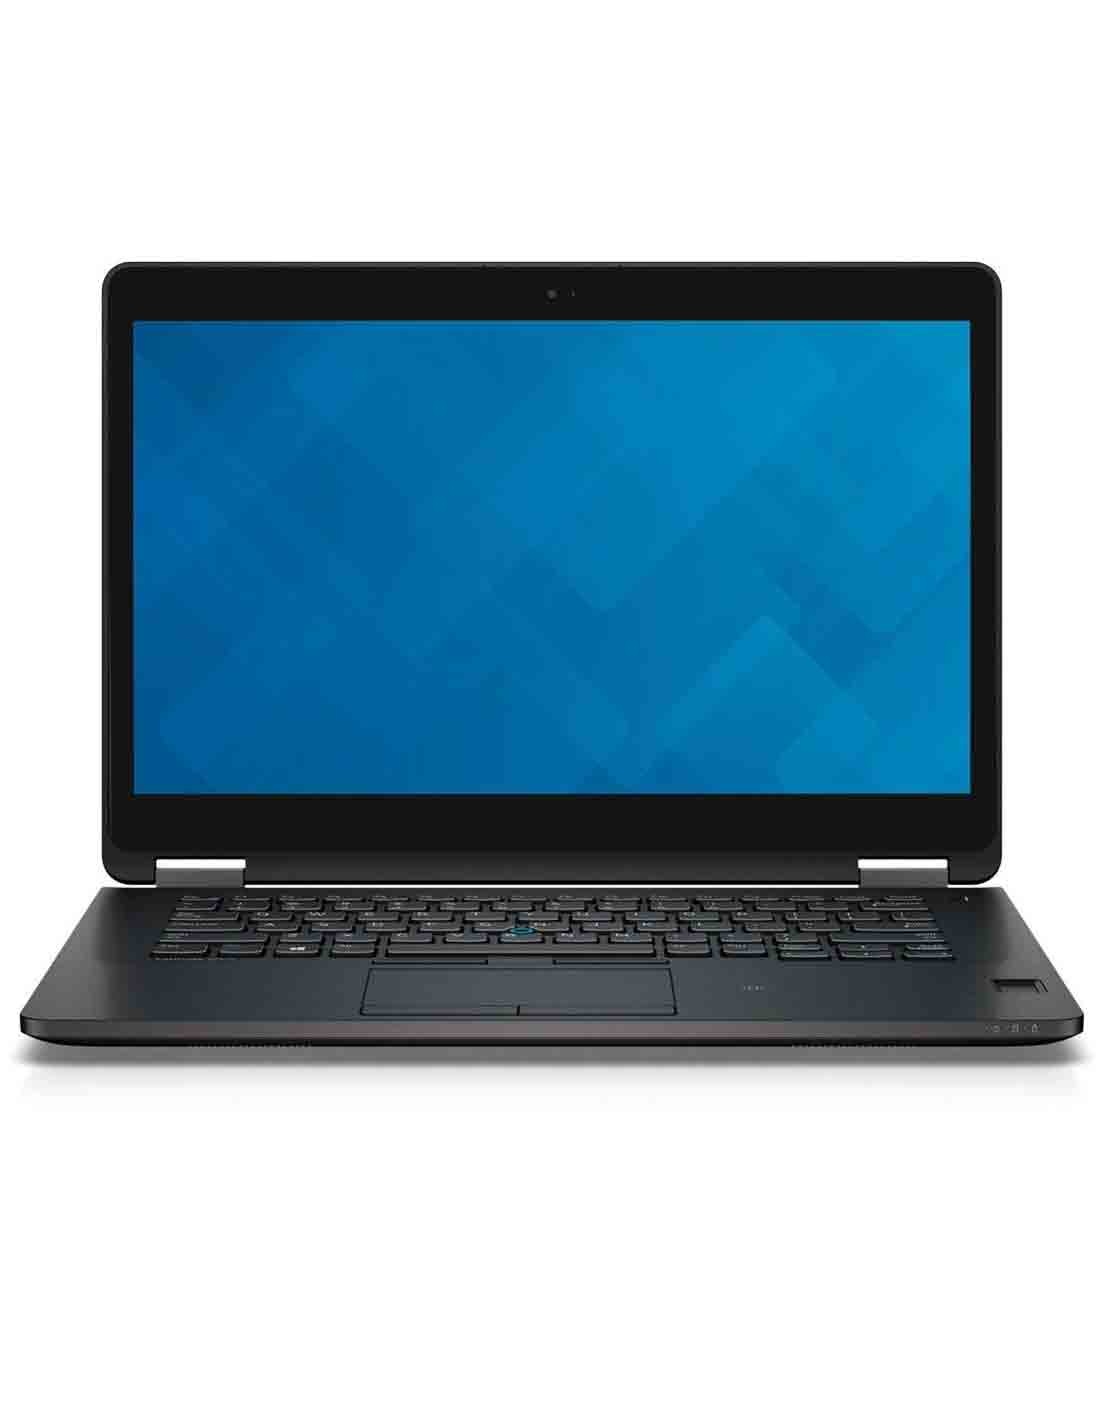 Buy Online Dell Latitude E7470 Core i7 Business Laptop at an Affordable Price in Dubai